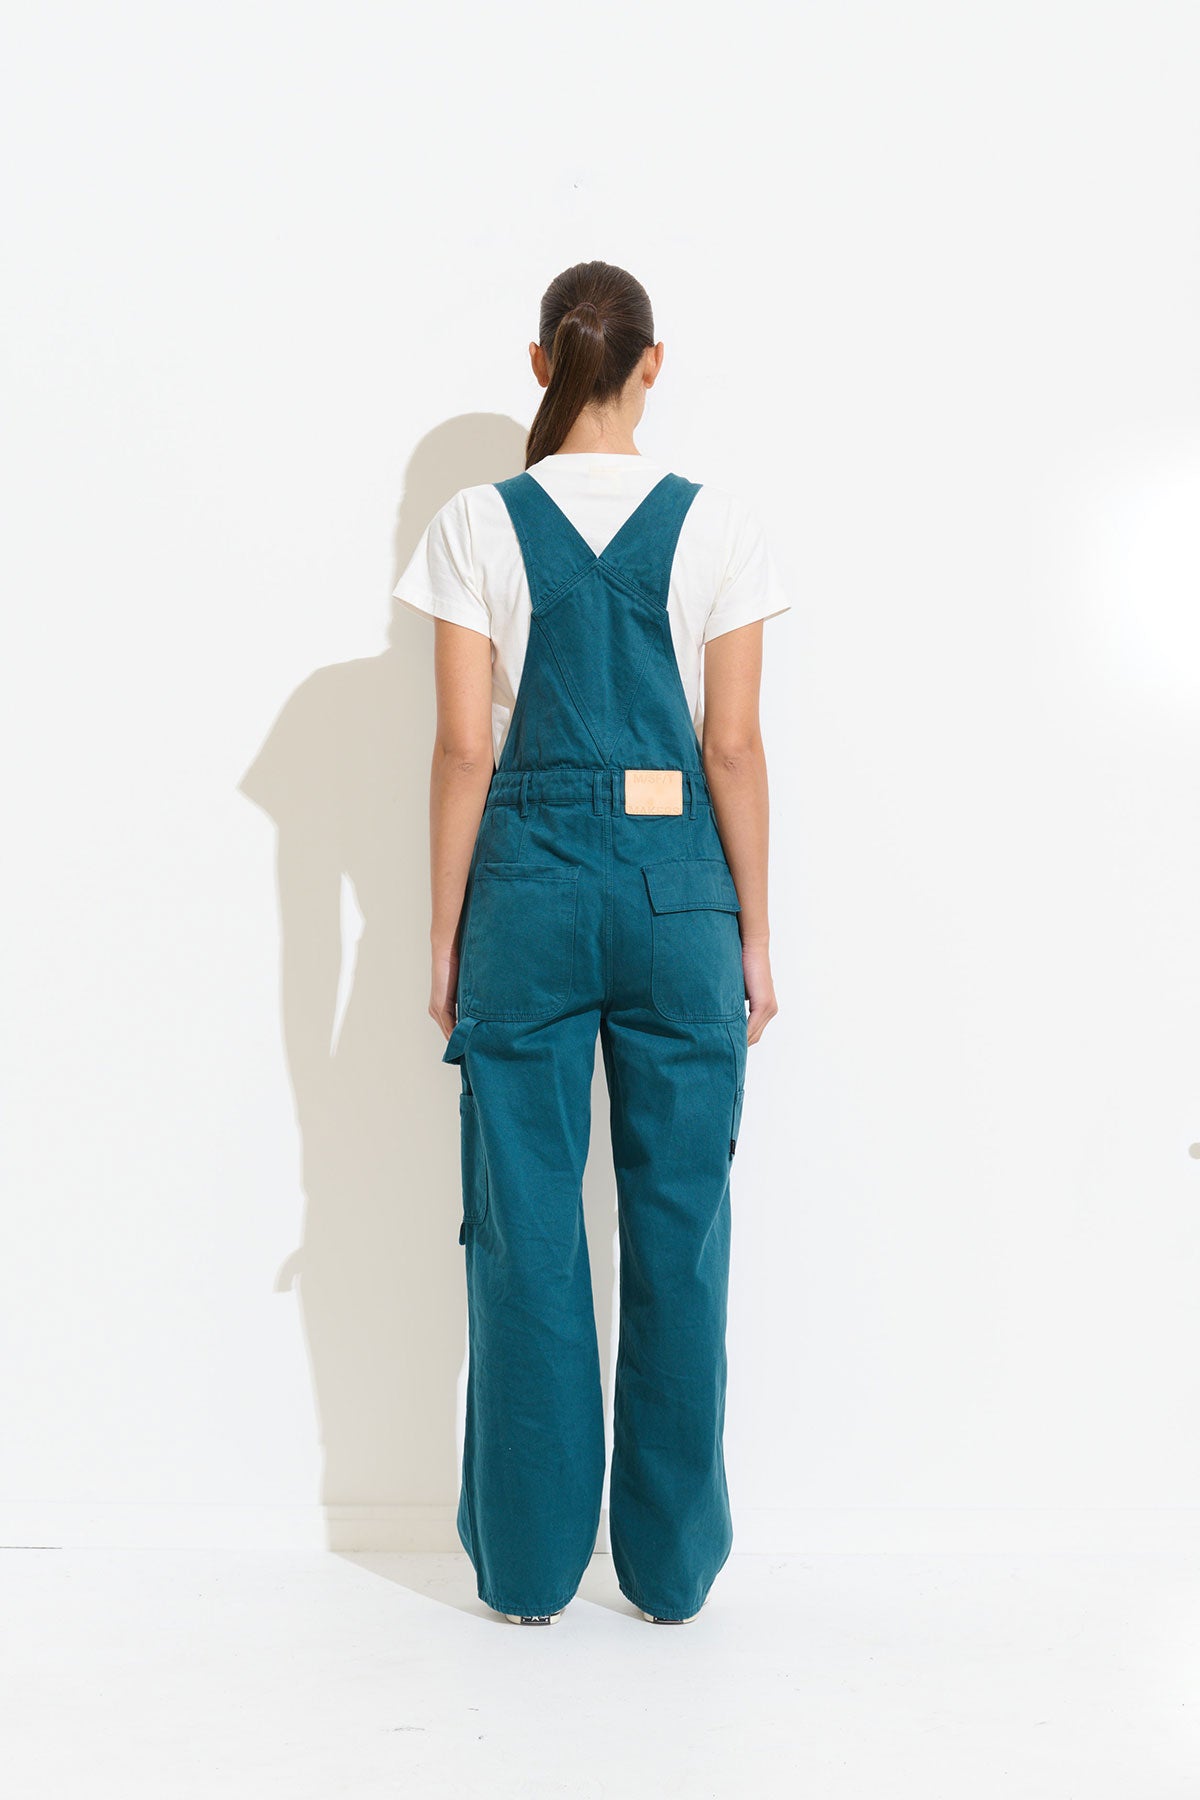 Misfit Shapes - Unisex Makers Overall - Greenish